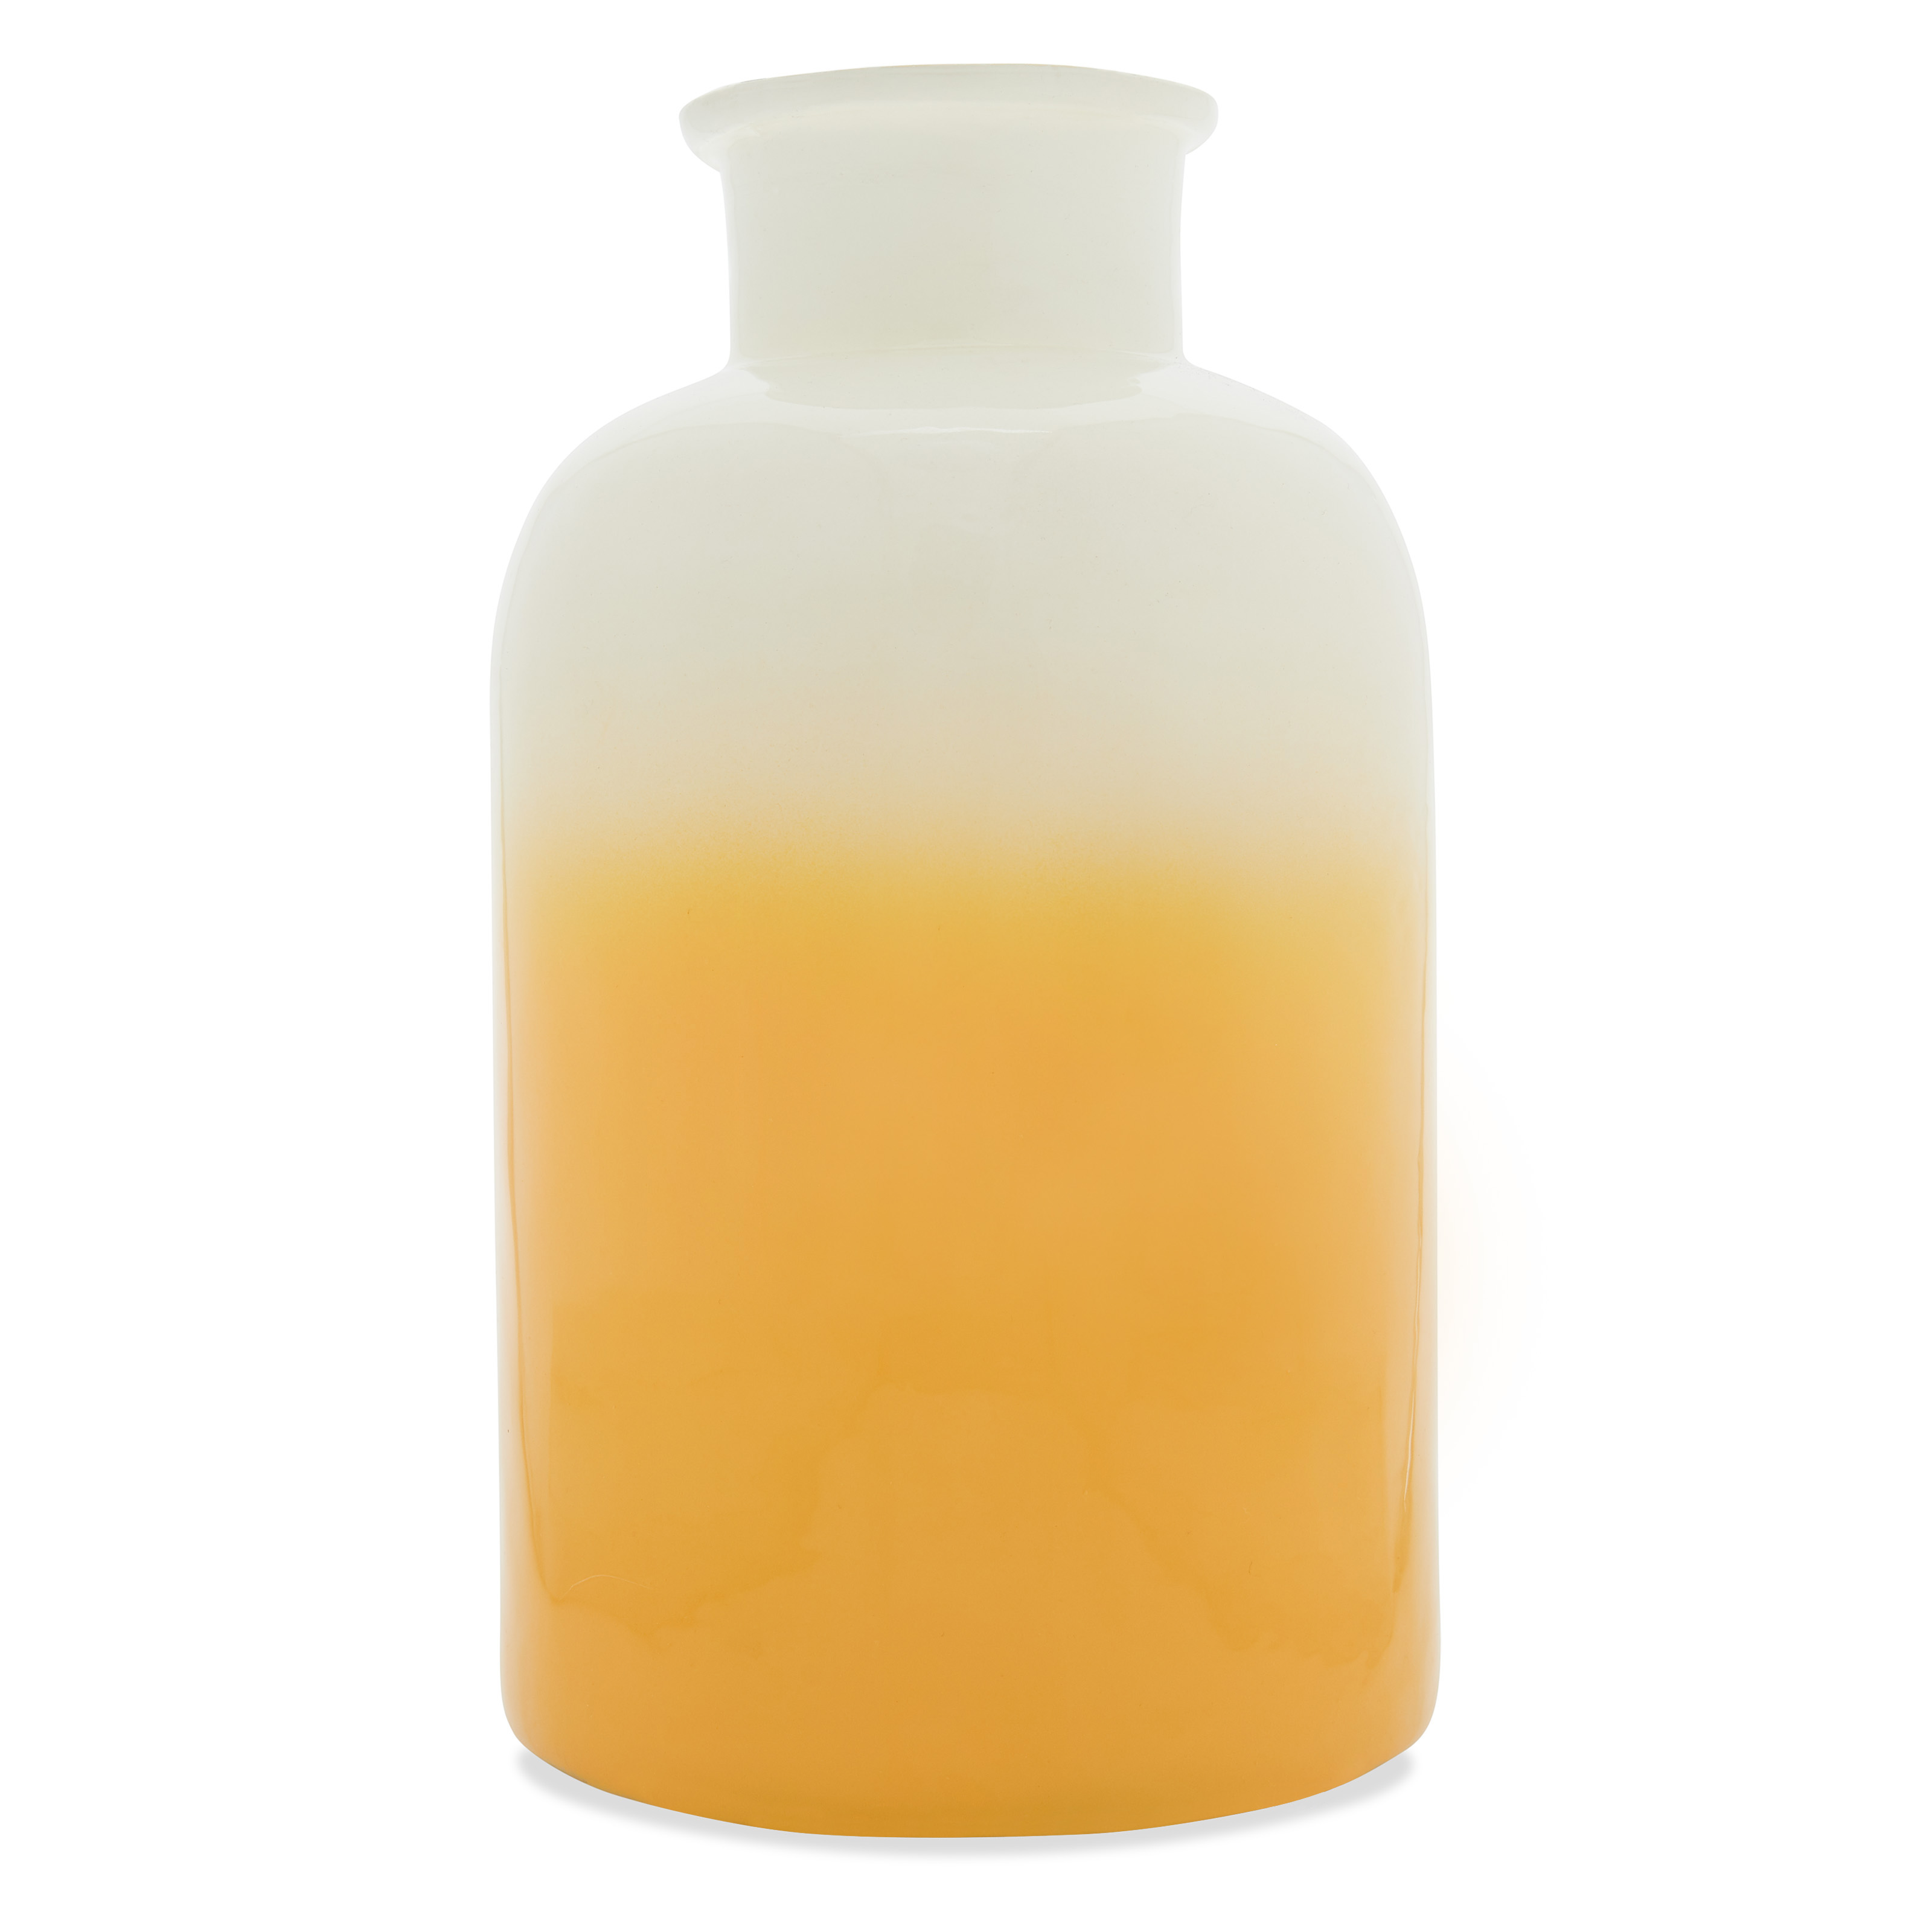 Sahara Gold Ombre Decorative Bottle by Drew Barrymore Flower Home - image 4 of 5